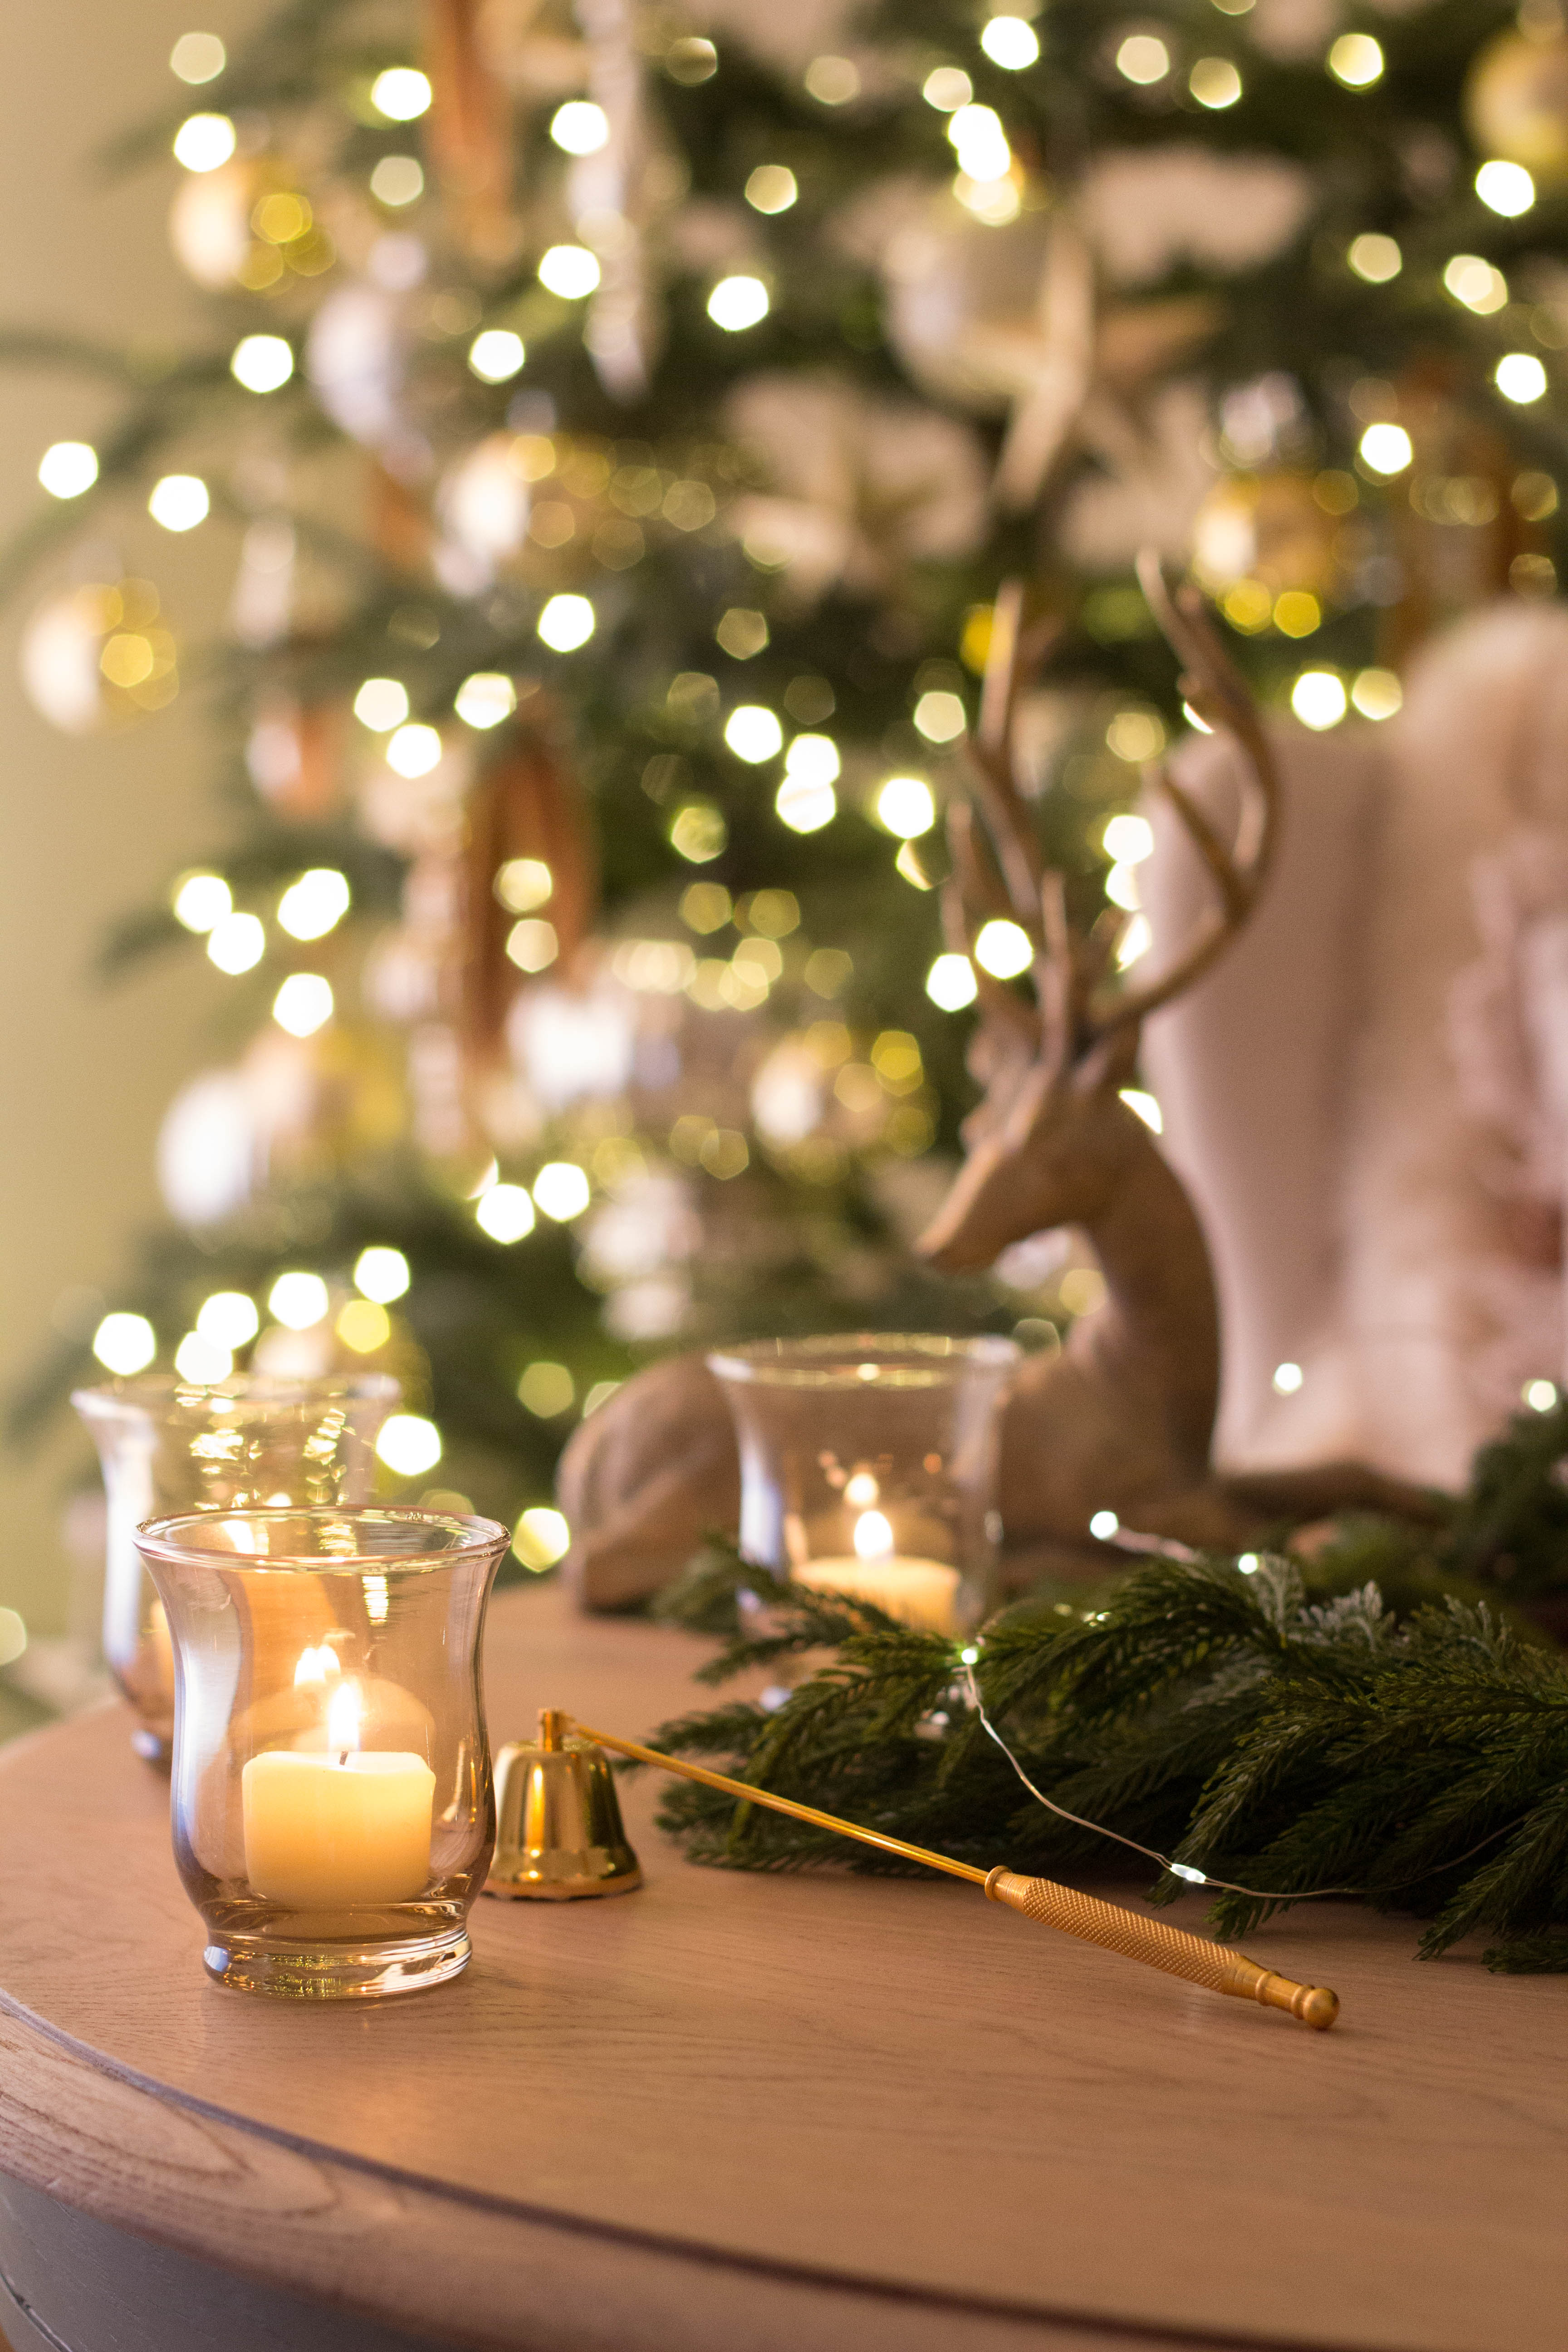 Christmas Magic With Twinkly Lights